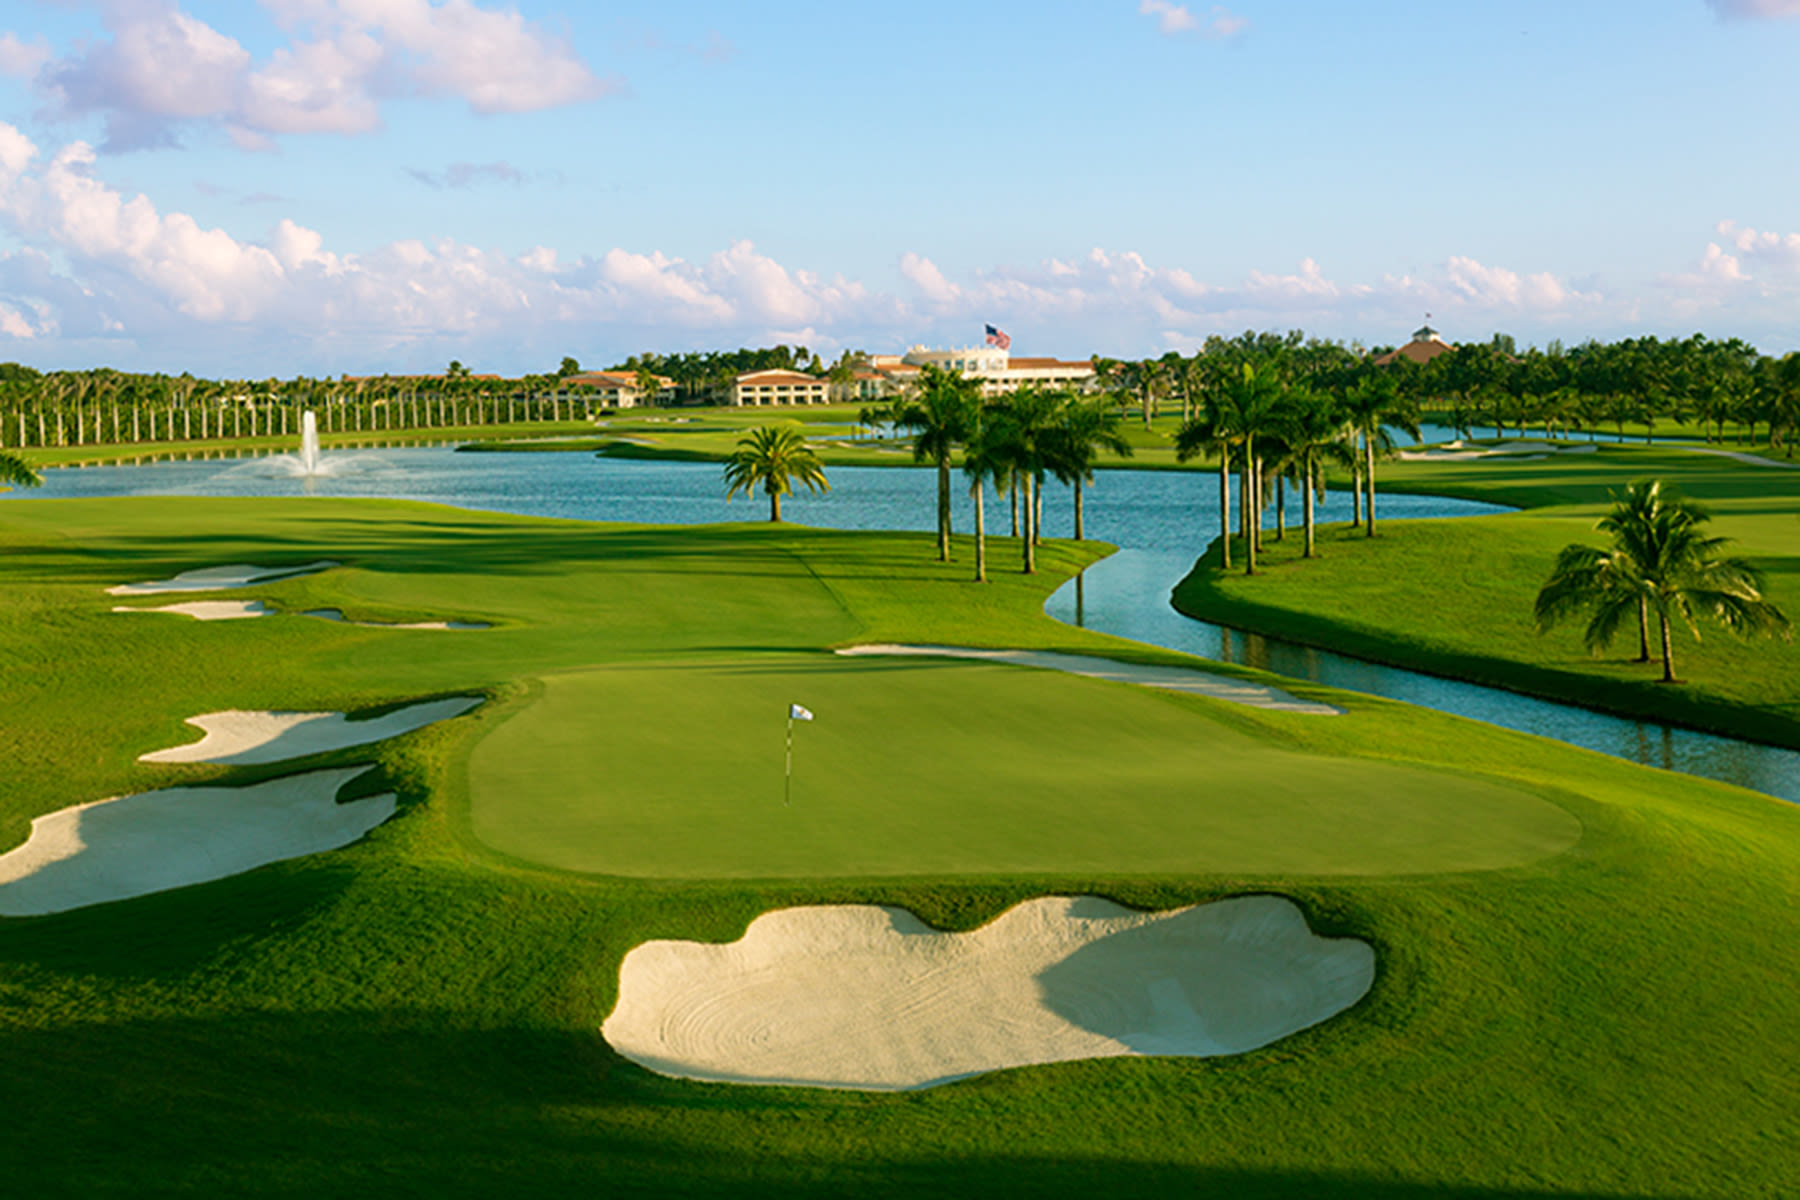 How Many Golf Courses Are in Miami?